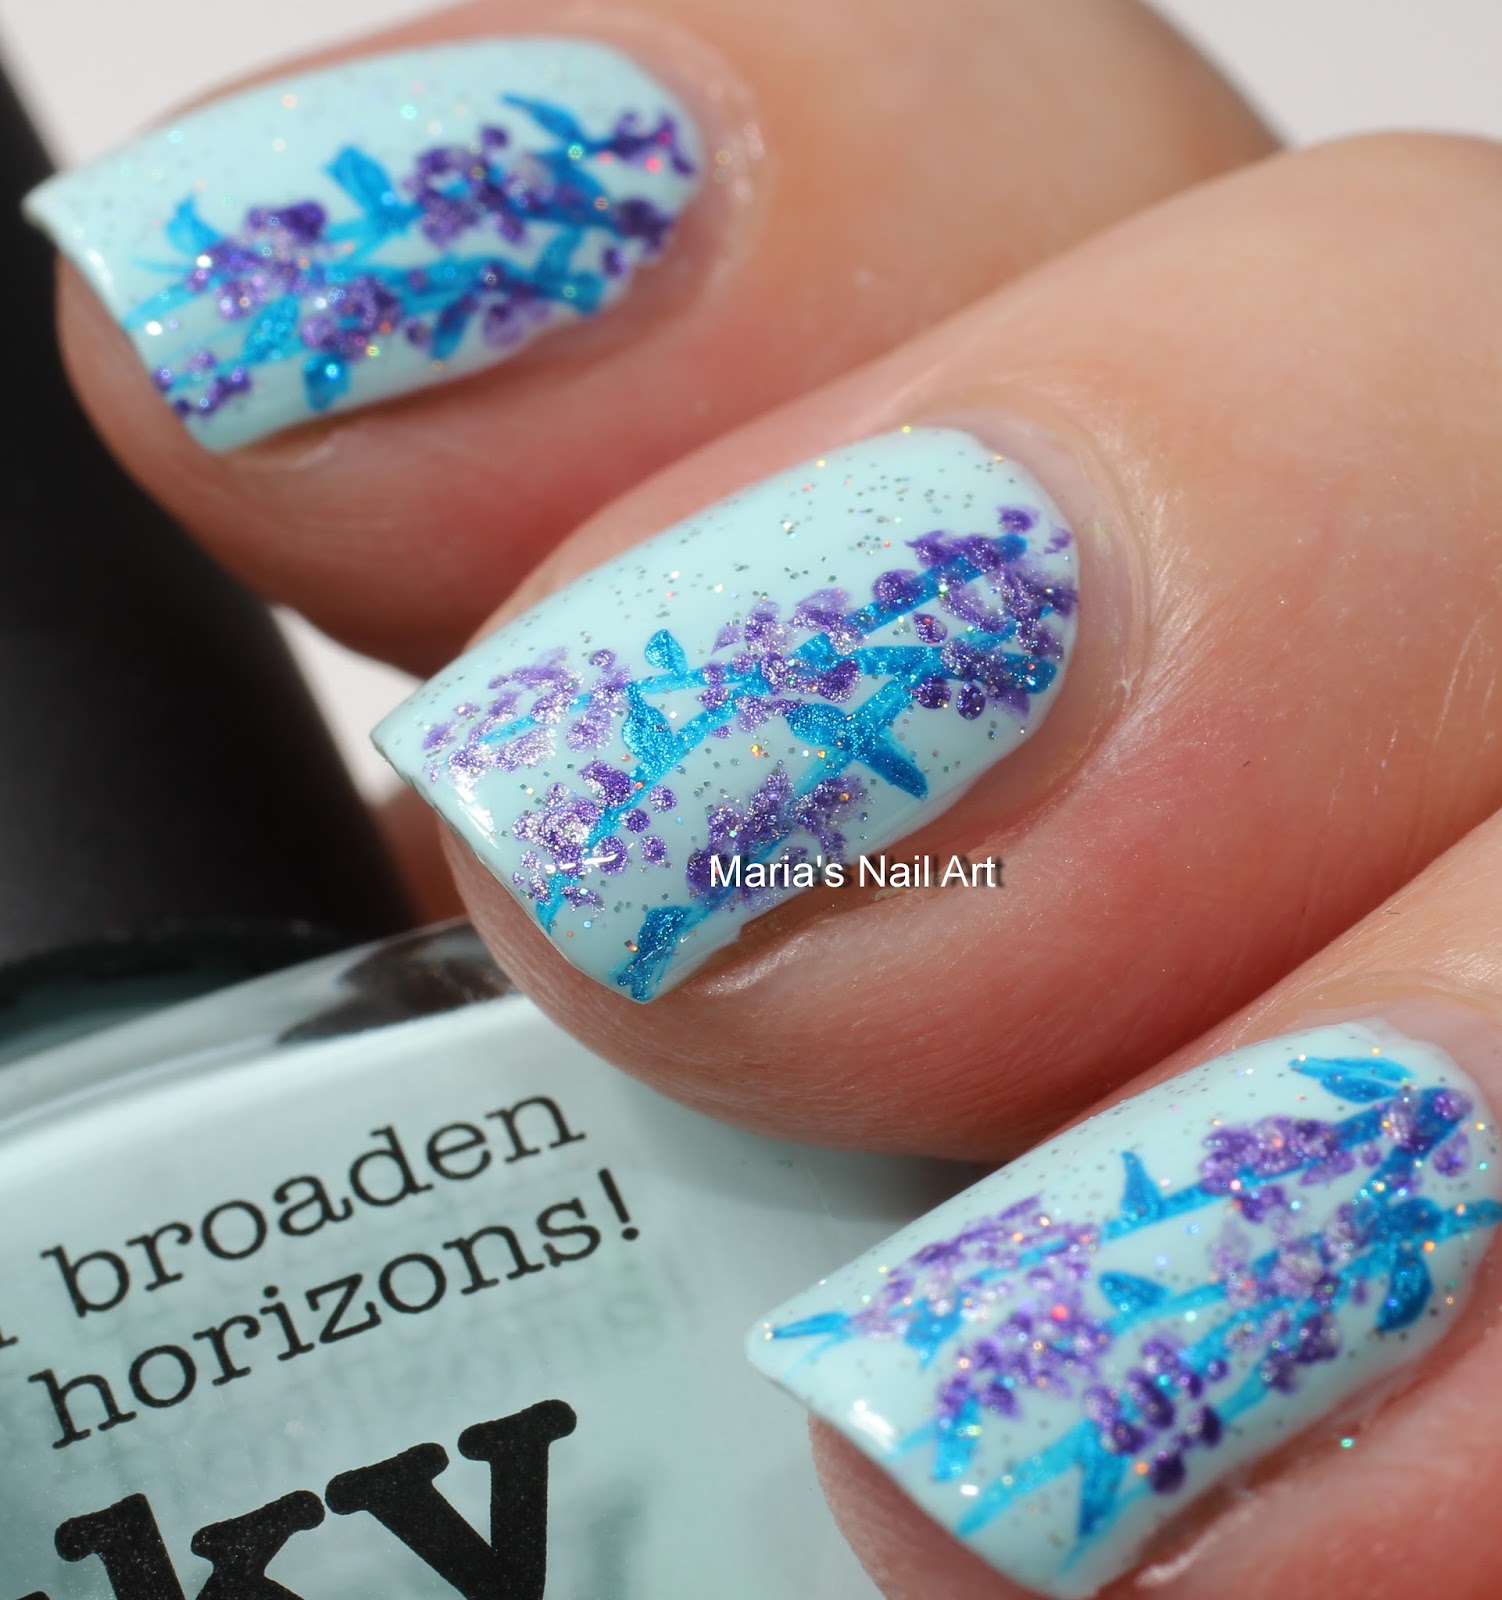 Marias Nail Art and Polish Blog: Clusters of flowers on the glittery sky